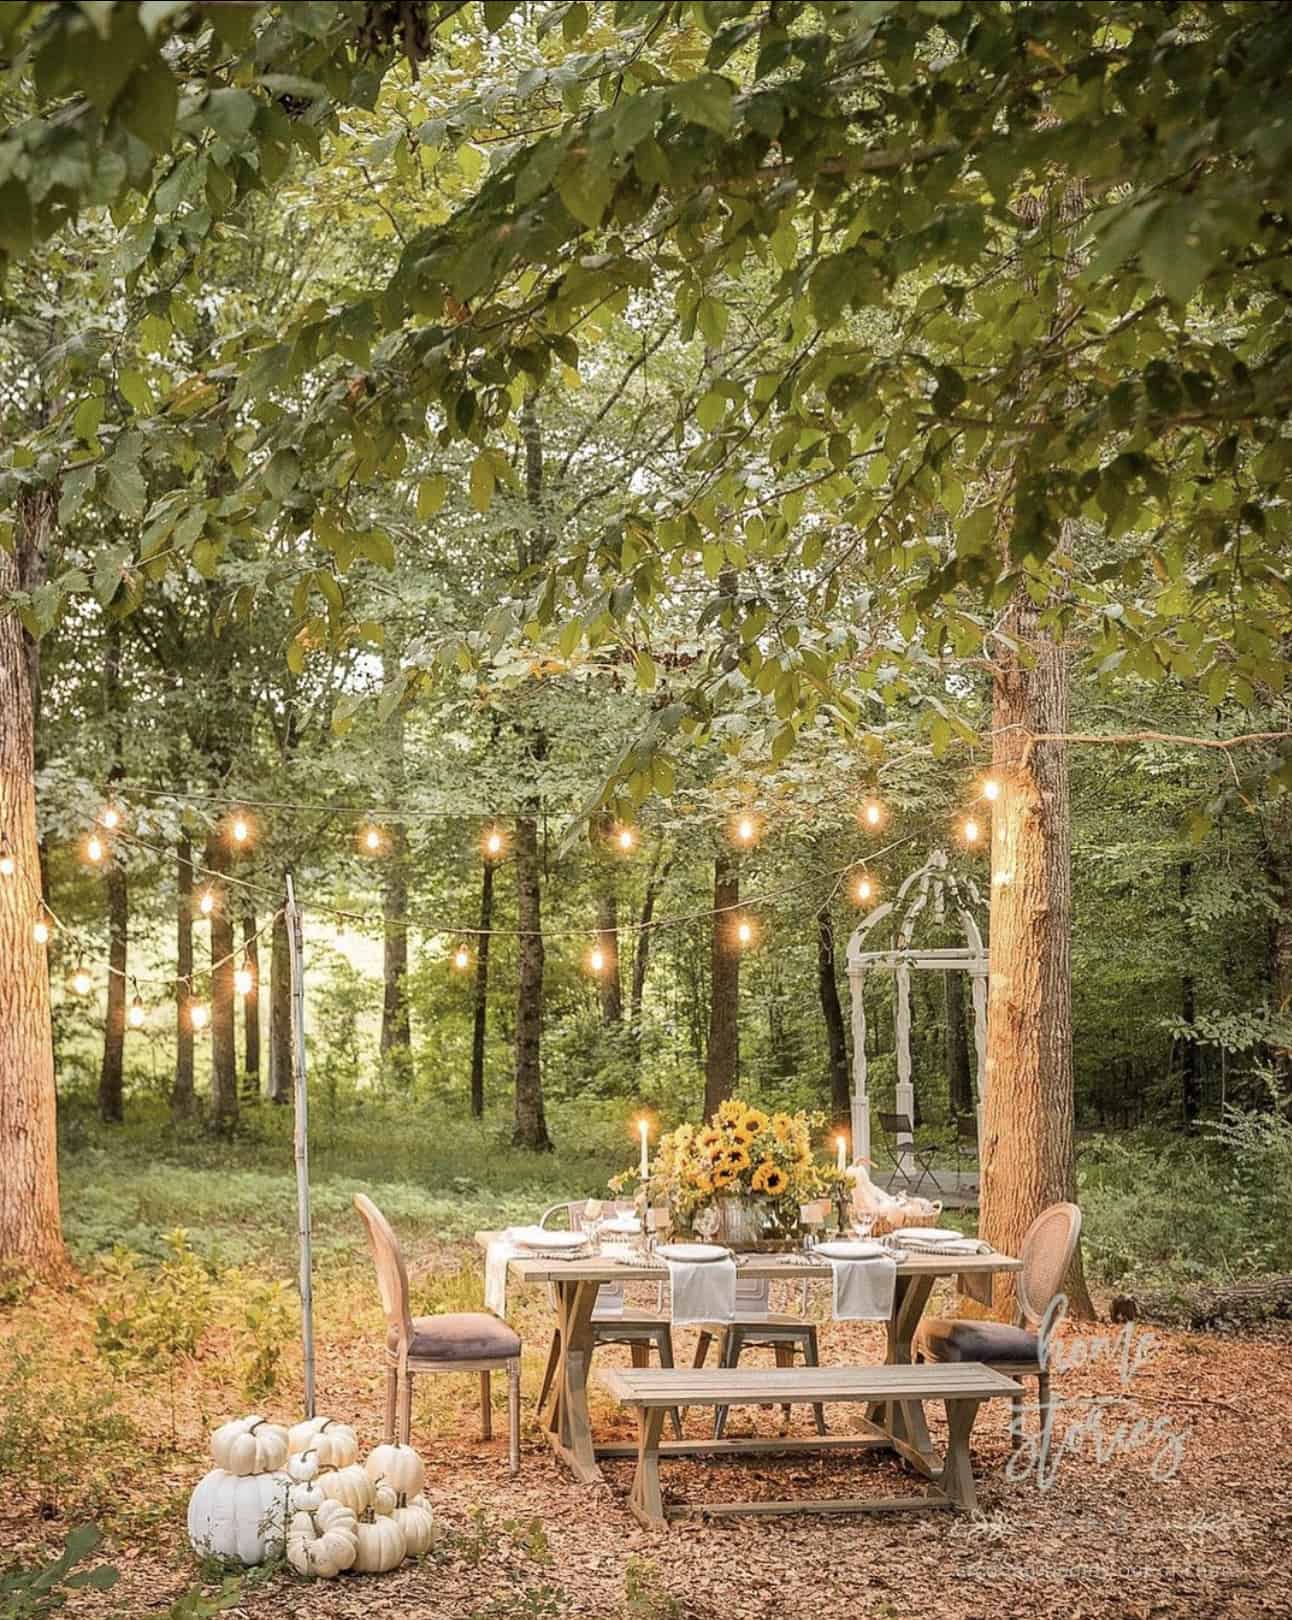 outdoor-alfresco-dining-in-the-woods-with-pumpkins-and-string-lights